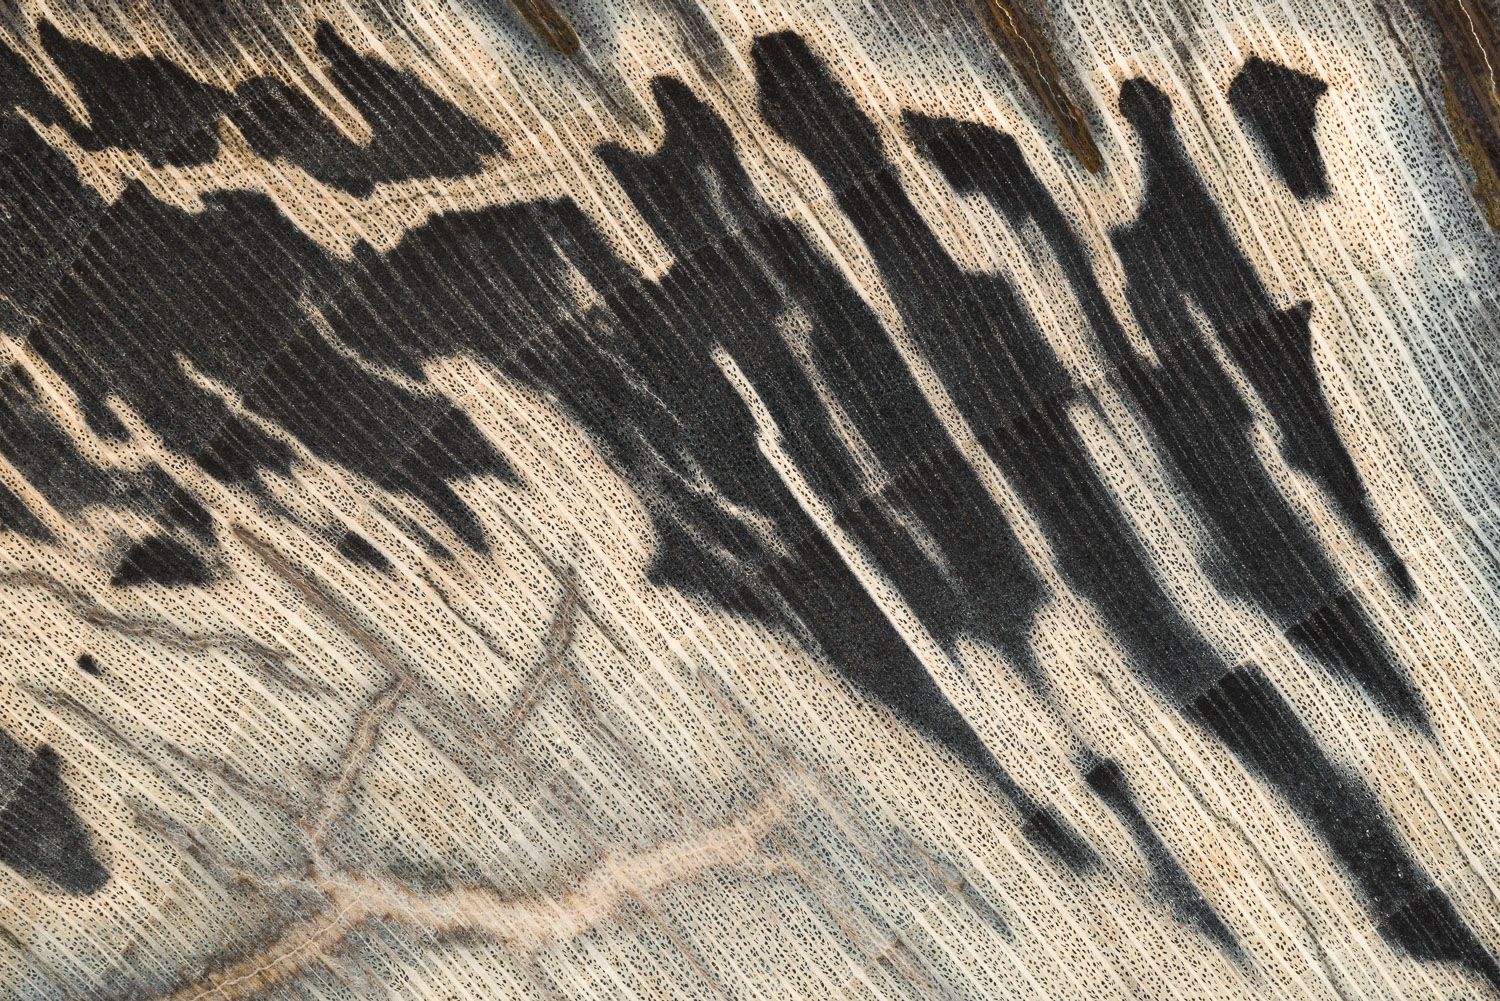 Close-up of the structural detail in a piece of fossilized wood from Sweet Home, Oregon. Image #3918